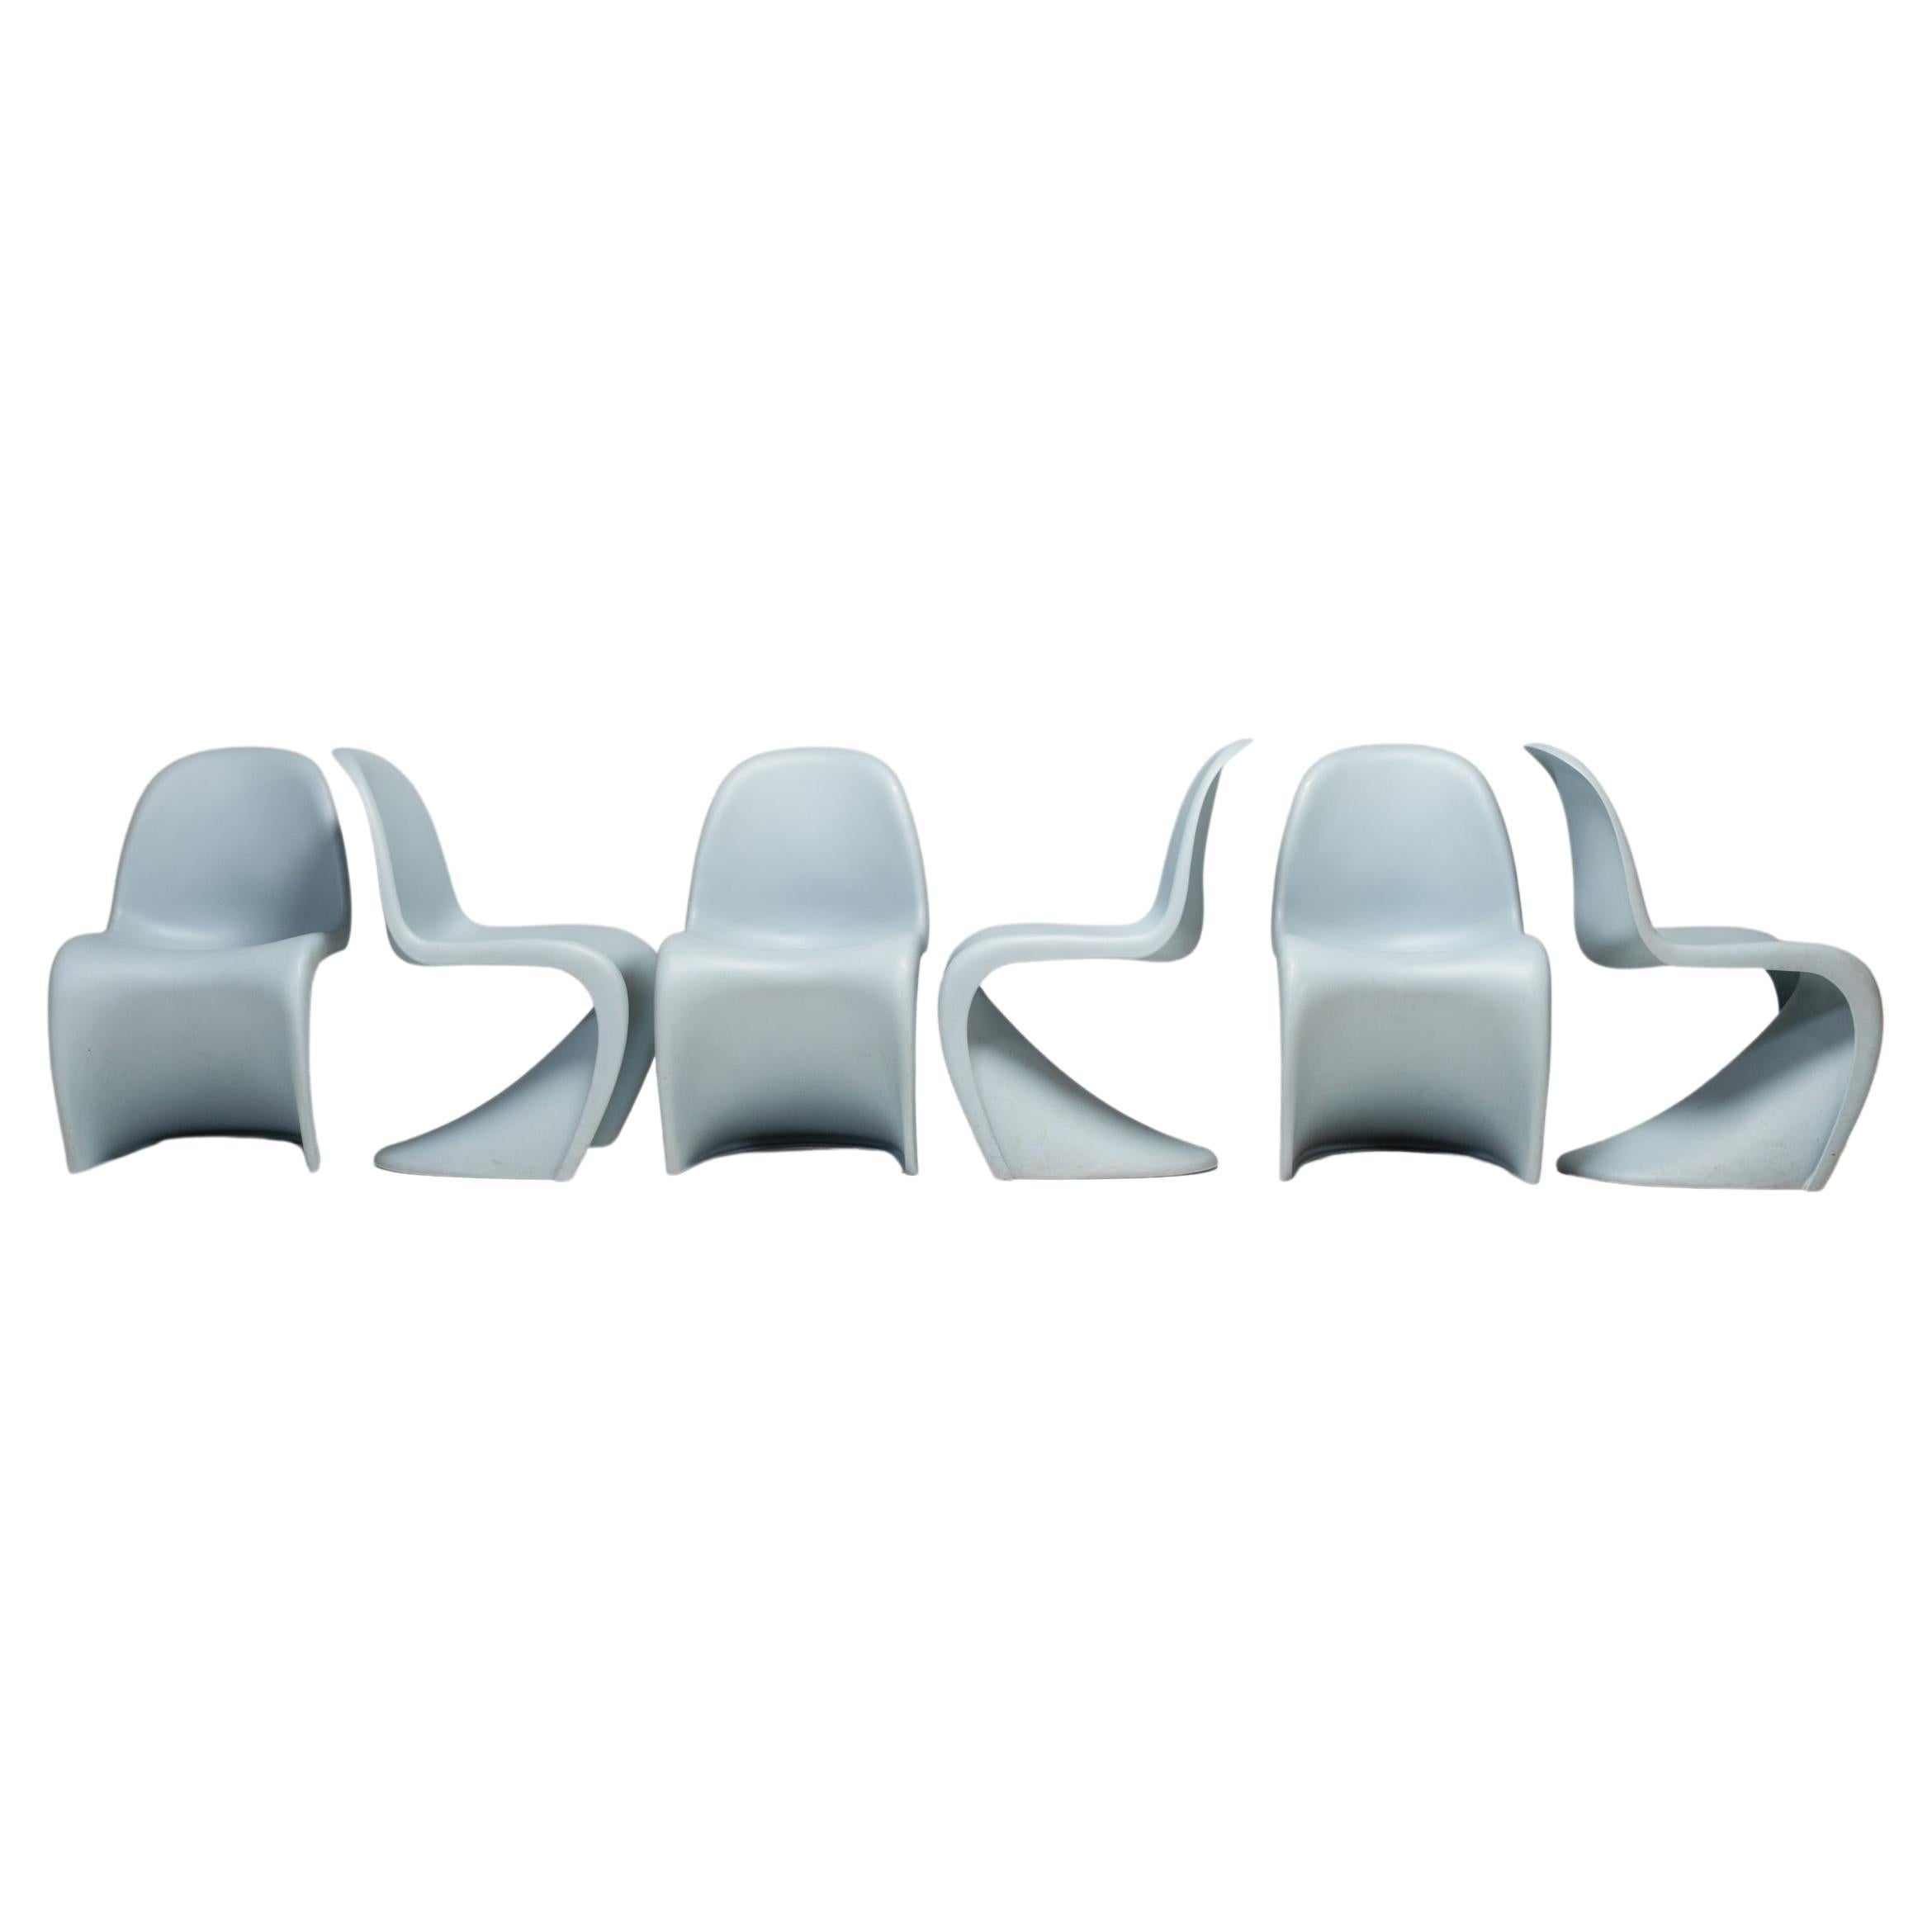 Light Blue Panton Chairs by Verner Panton for Vitra, Set of 6